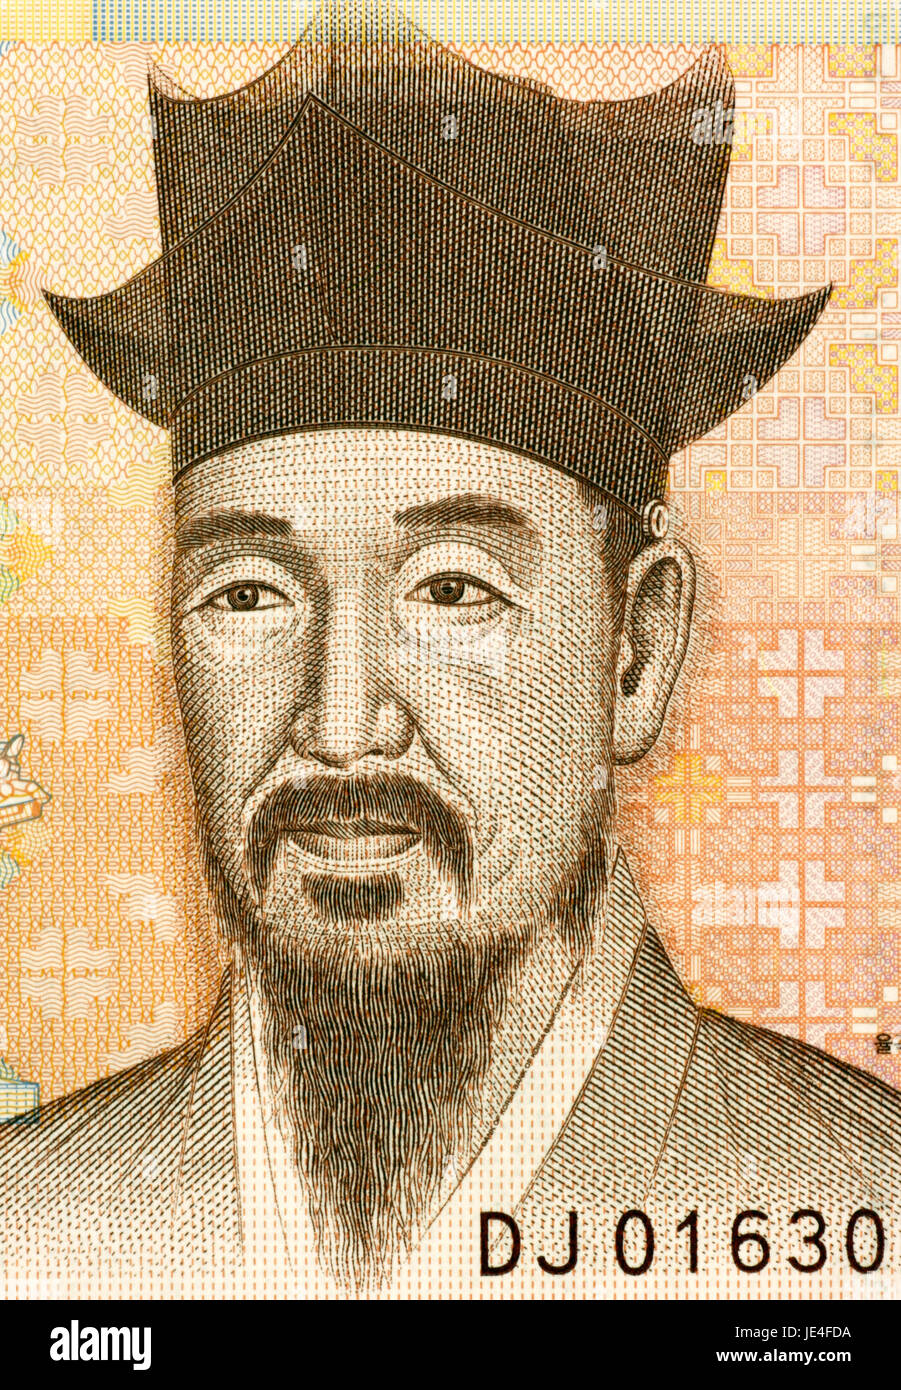 Yi I (1536-1584) on 5000 Won 2006 Banknote from South Korea. One of the two most prominent Korean Confucian scholars of the Joseon Dynasty, Stock Photo